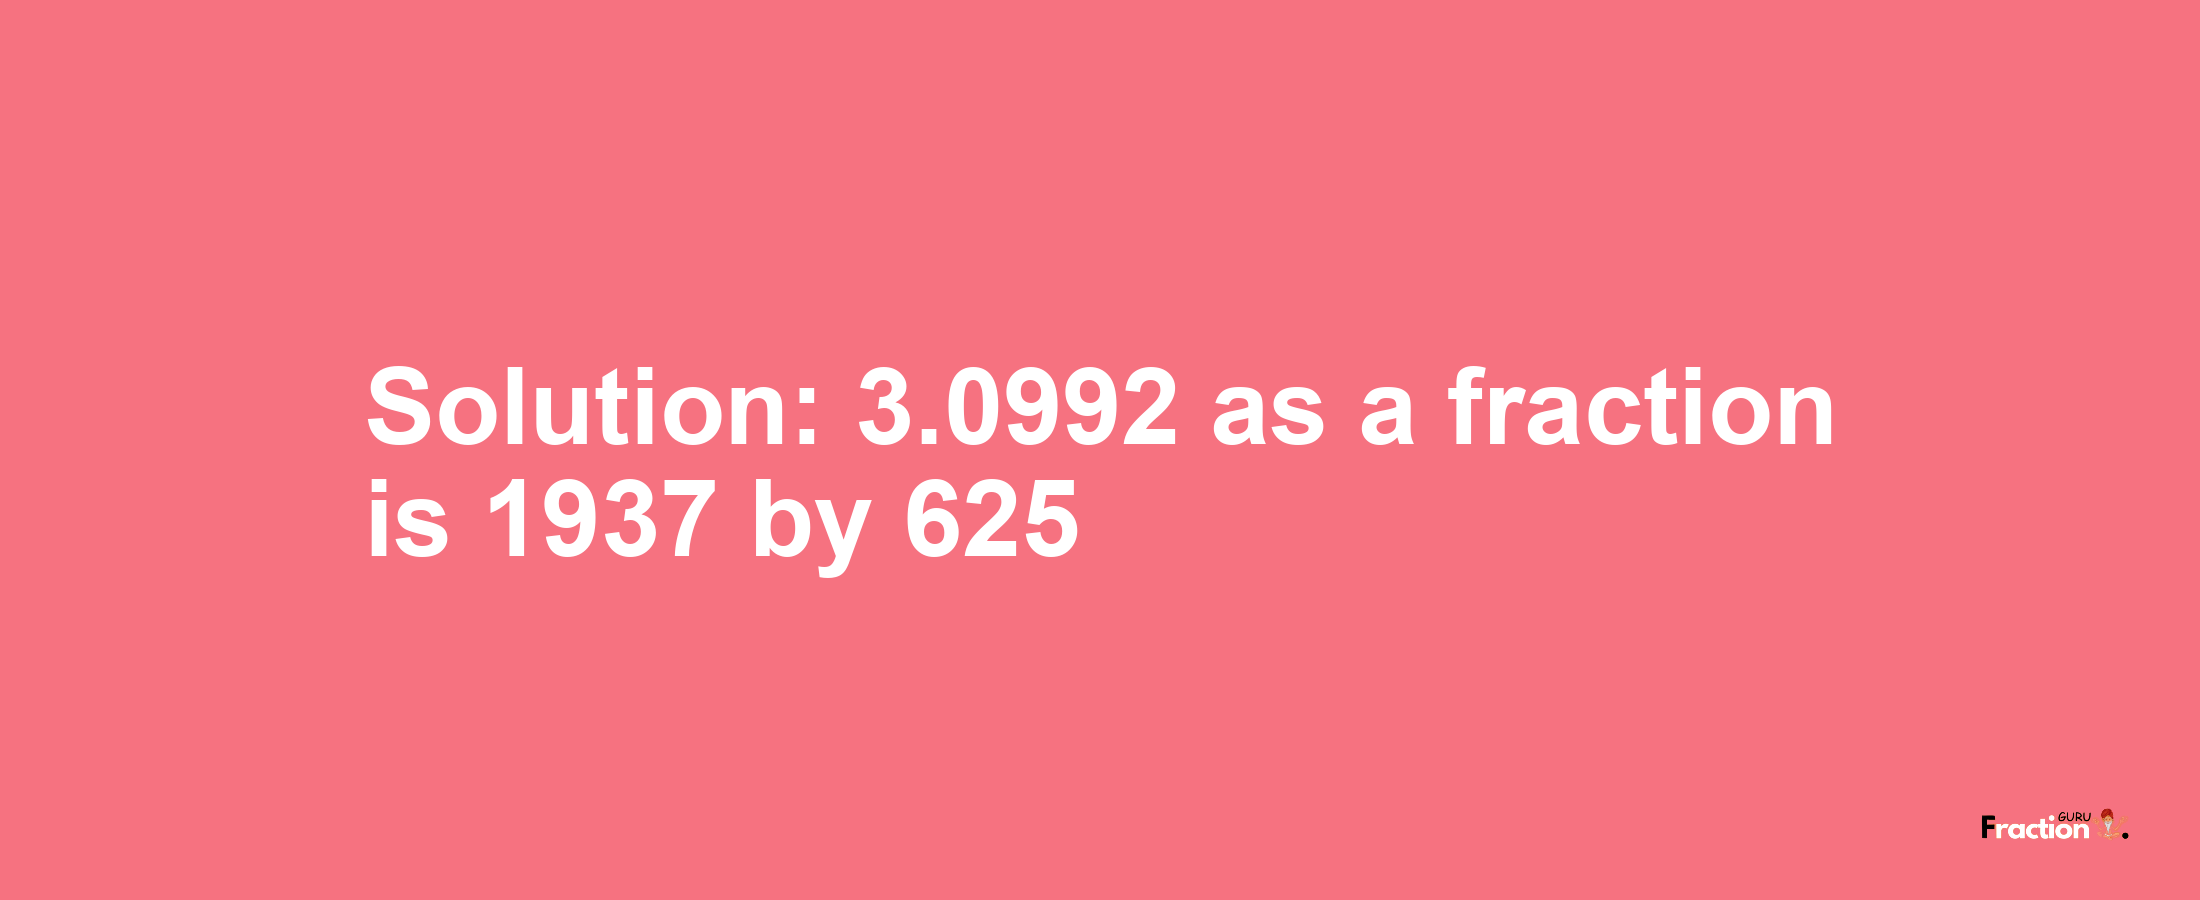 Solution:3.0992 as a fraction is 1937/625